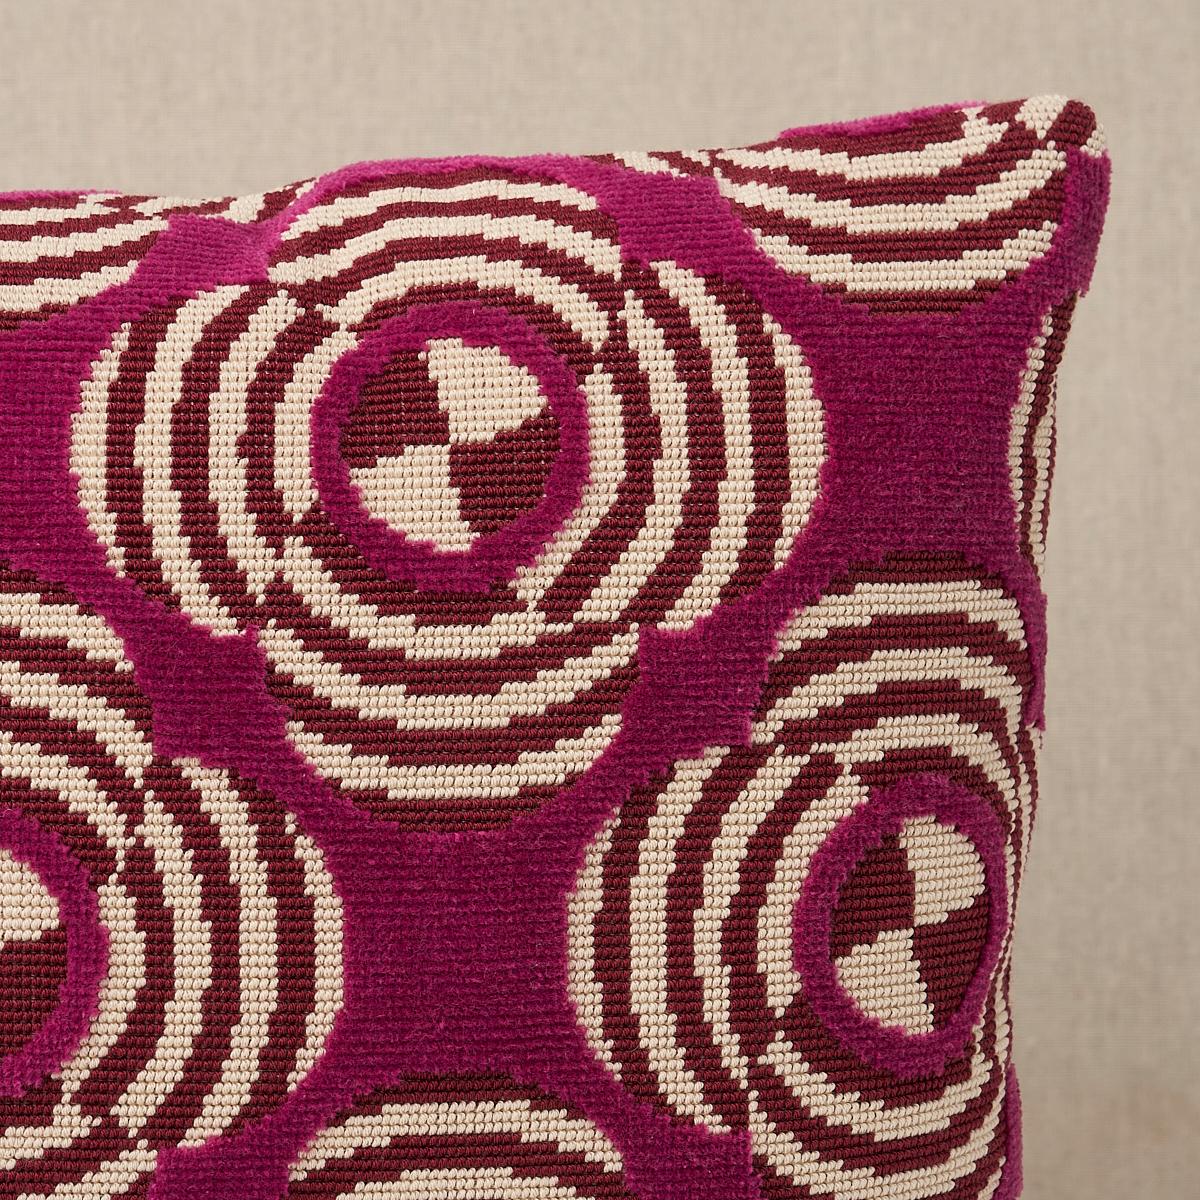 This pillow features Le Moderne Cut Velvet by Johnson Hartig for Schumacher with a knife edge finish. A geometric floral motif with an Art Deco echo, Le Moderne Cut Velvet in magenta is a gorgeous textural fabric design by Johnson Hartig of